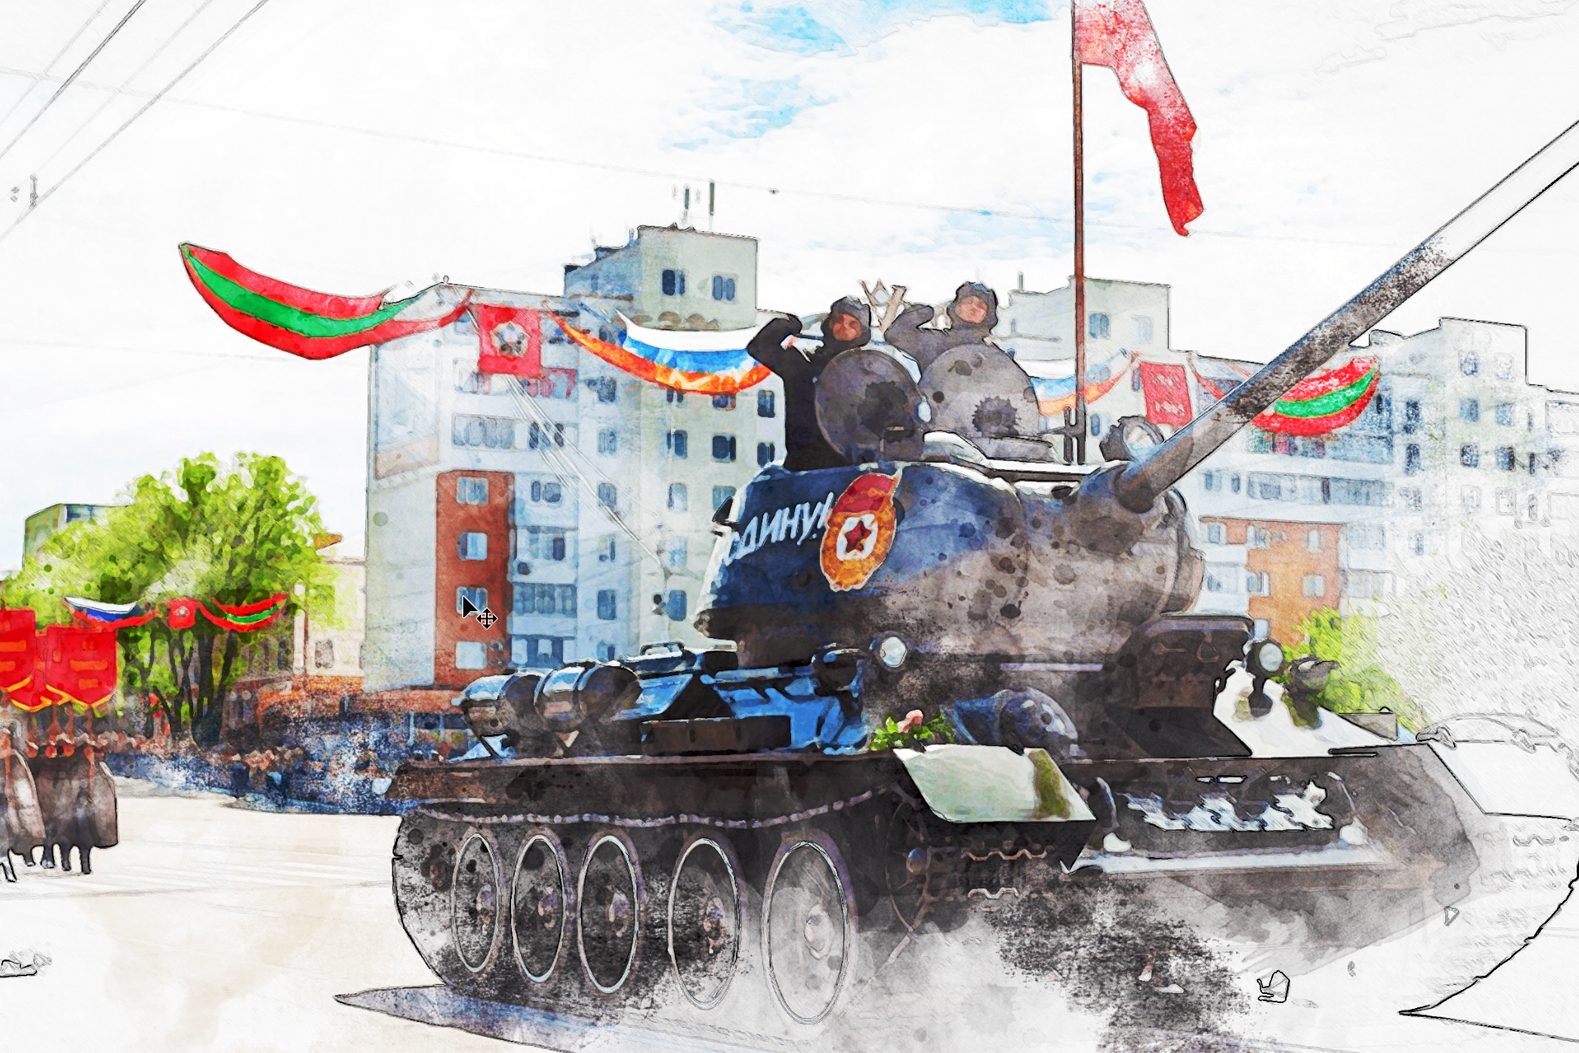 Transnistria appeals to Russia for “protection”